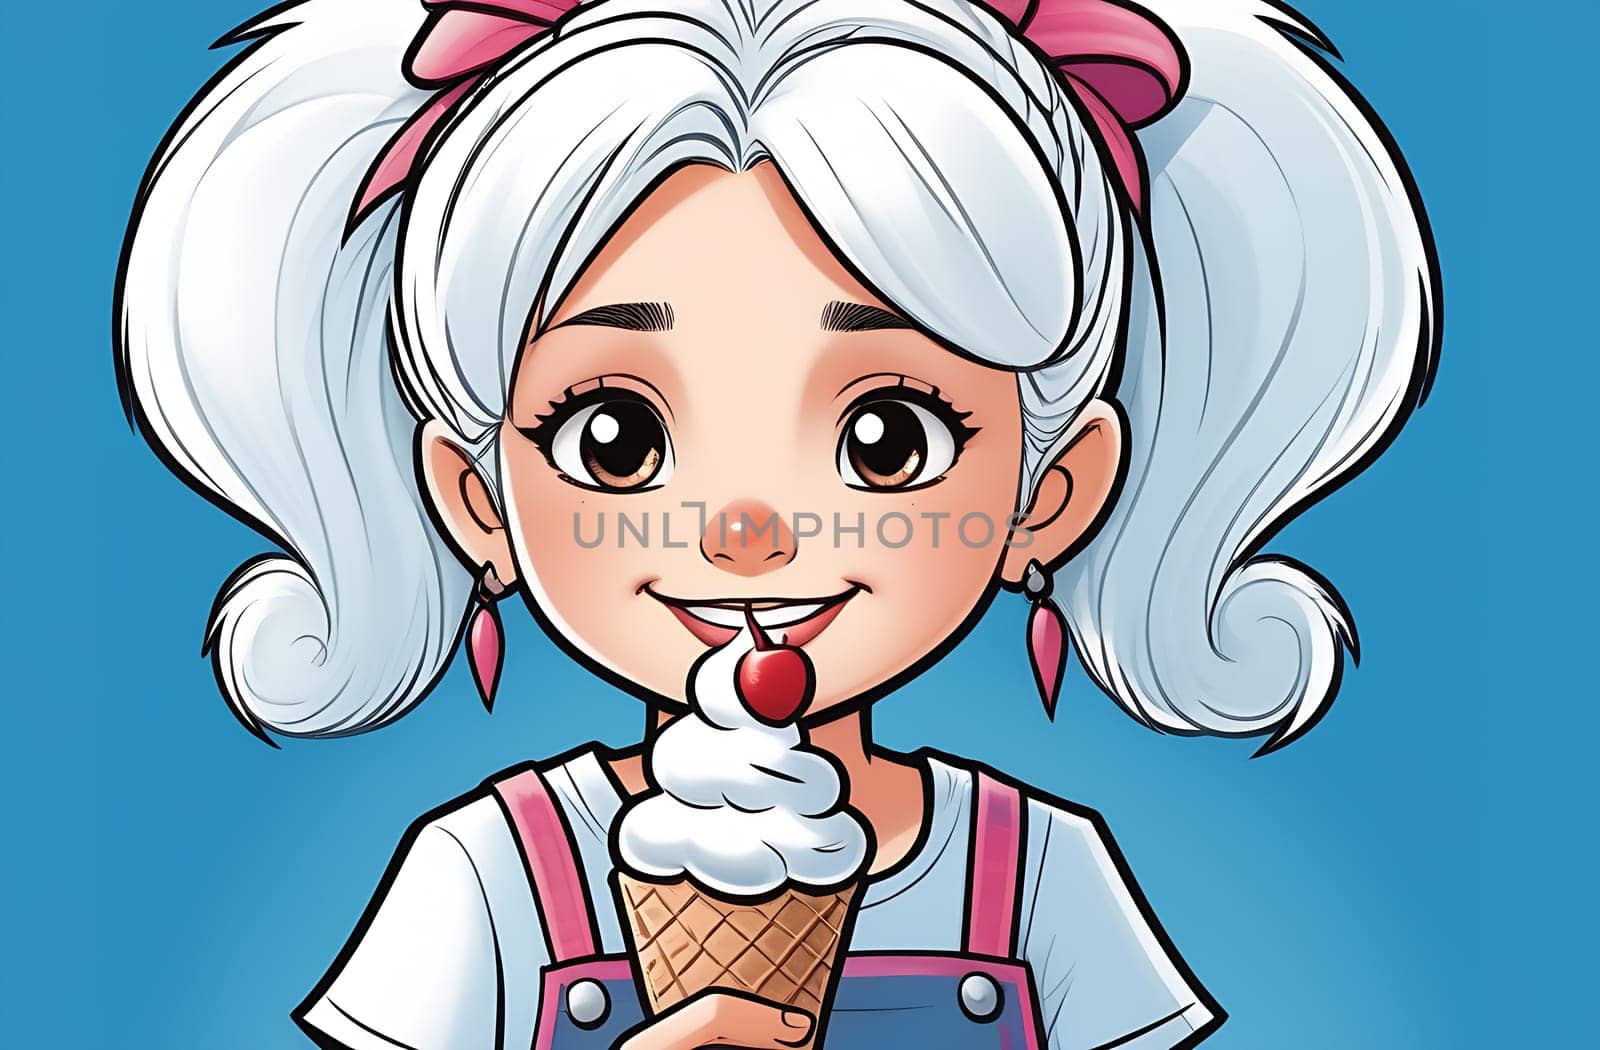 Cute cartoon little girl eating an ice cream cone, on a blue background, close-up.